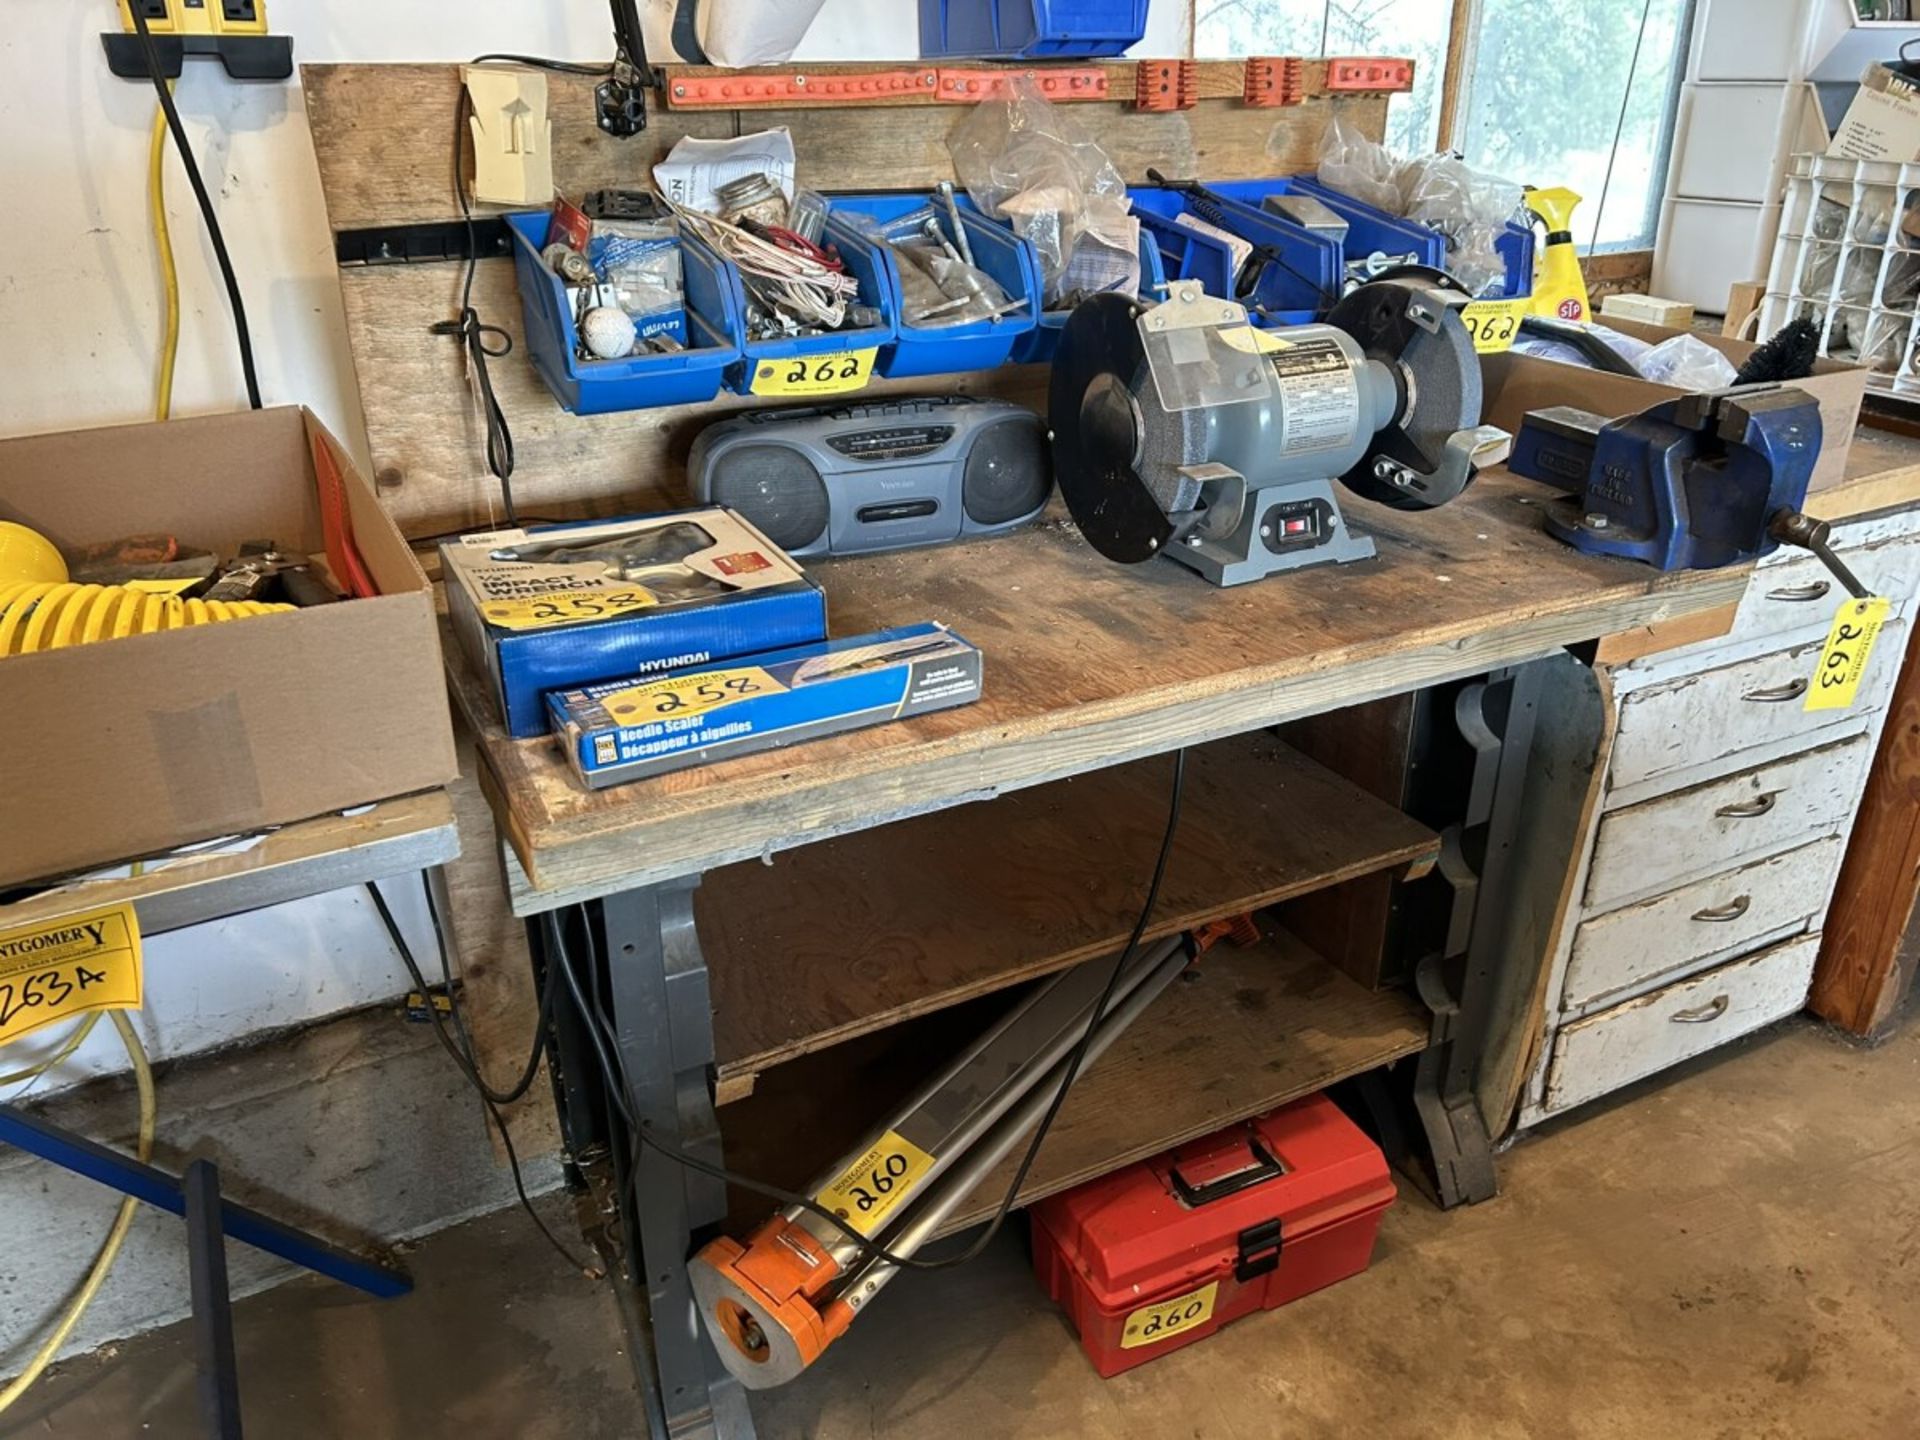 48"X24"X36" WORK BENCH W/ 4" BENCH VISE (POLY STORAGE BINS NOT INCLUDED) - Image 2 of 5